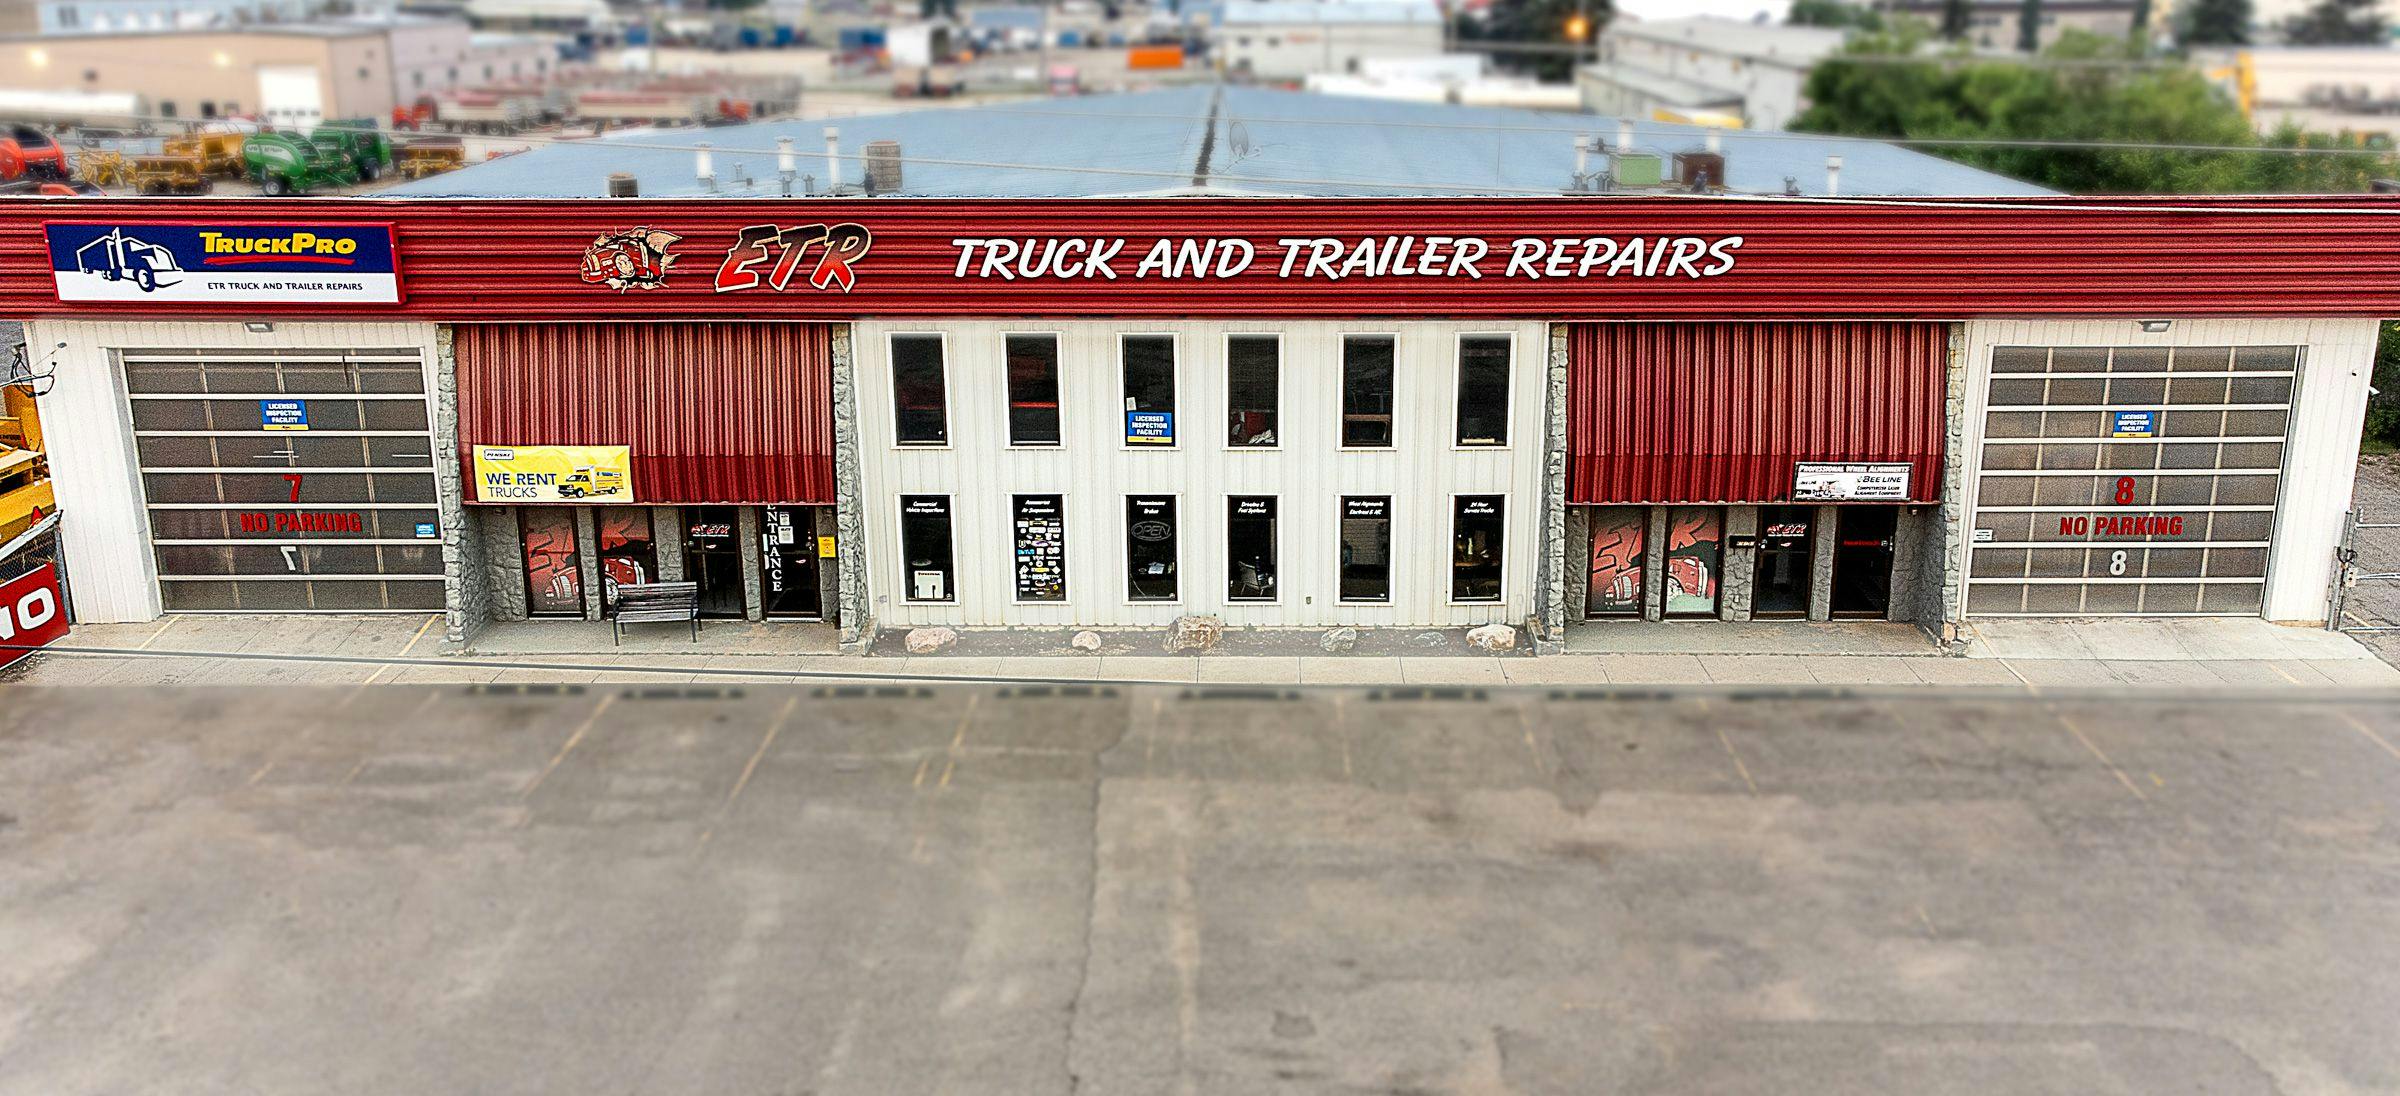 ETR Truck and Trailer Building